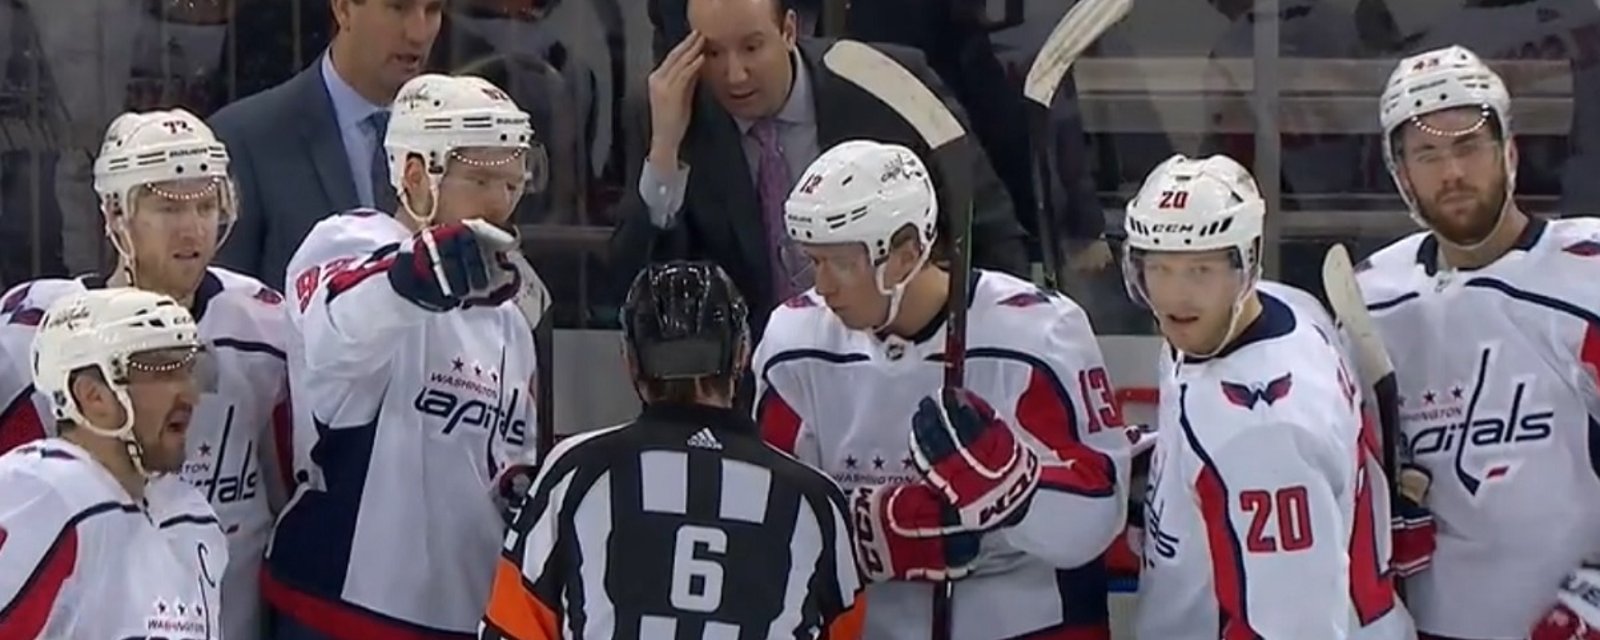 Controversial finish at MSG after Georgiev throws his stick at Ovechkin.